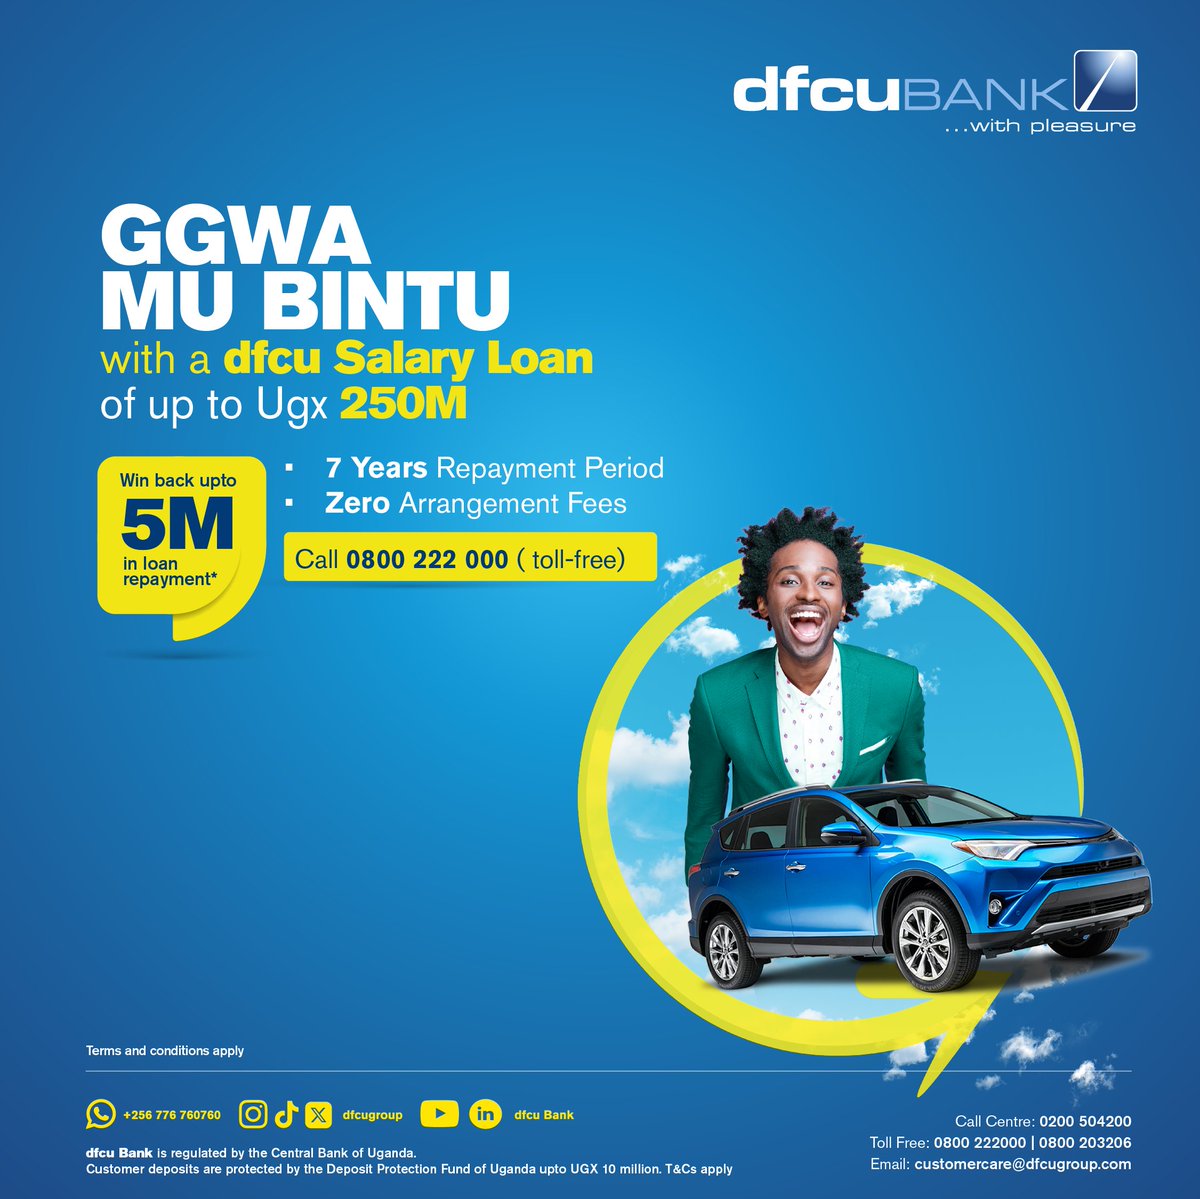 Unlock your dreams with a @dfcugroup Salary Loan of up to UGX 250M and stand a chance to win back up to 5M in loan repayment. Visit dfcugroup.com/promotions/ to apply today or call 0800 222 000.
#GgwaMuBintu